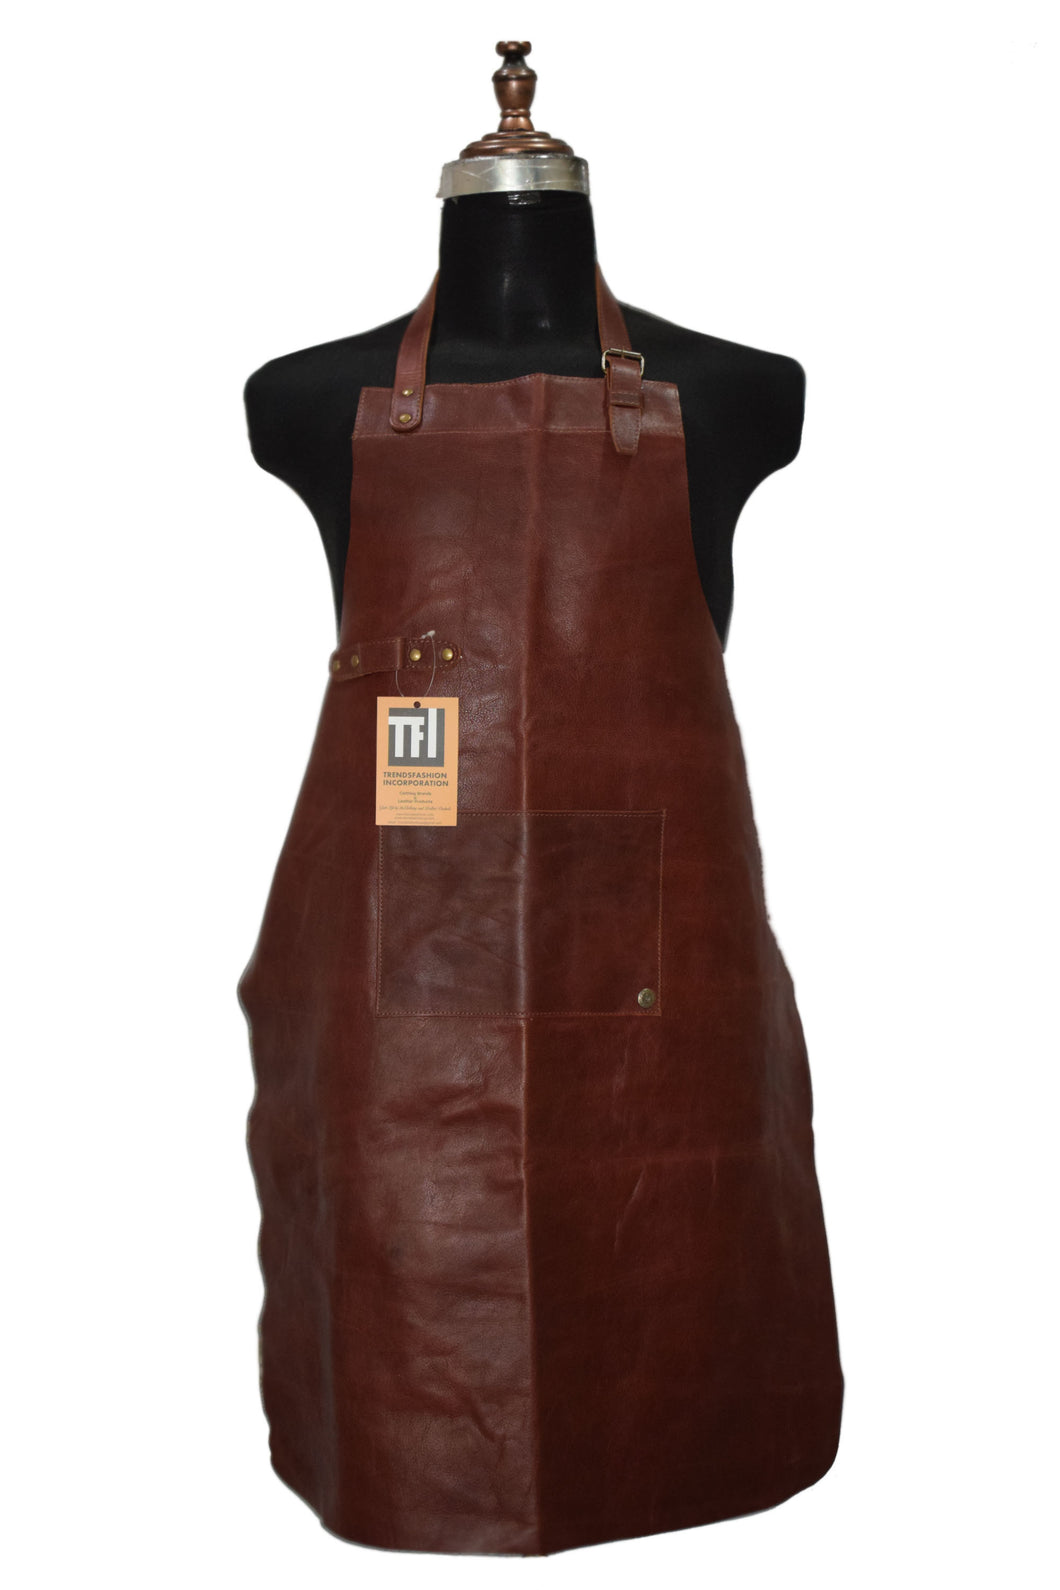 Brown Real Leather Apron Butcher Apron Cook Apron BBQ Apron Cooking Apron